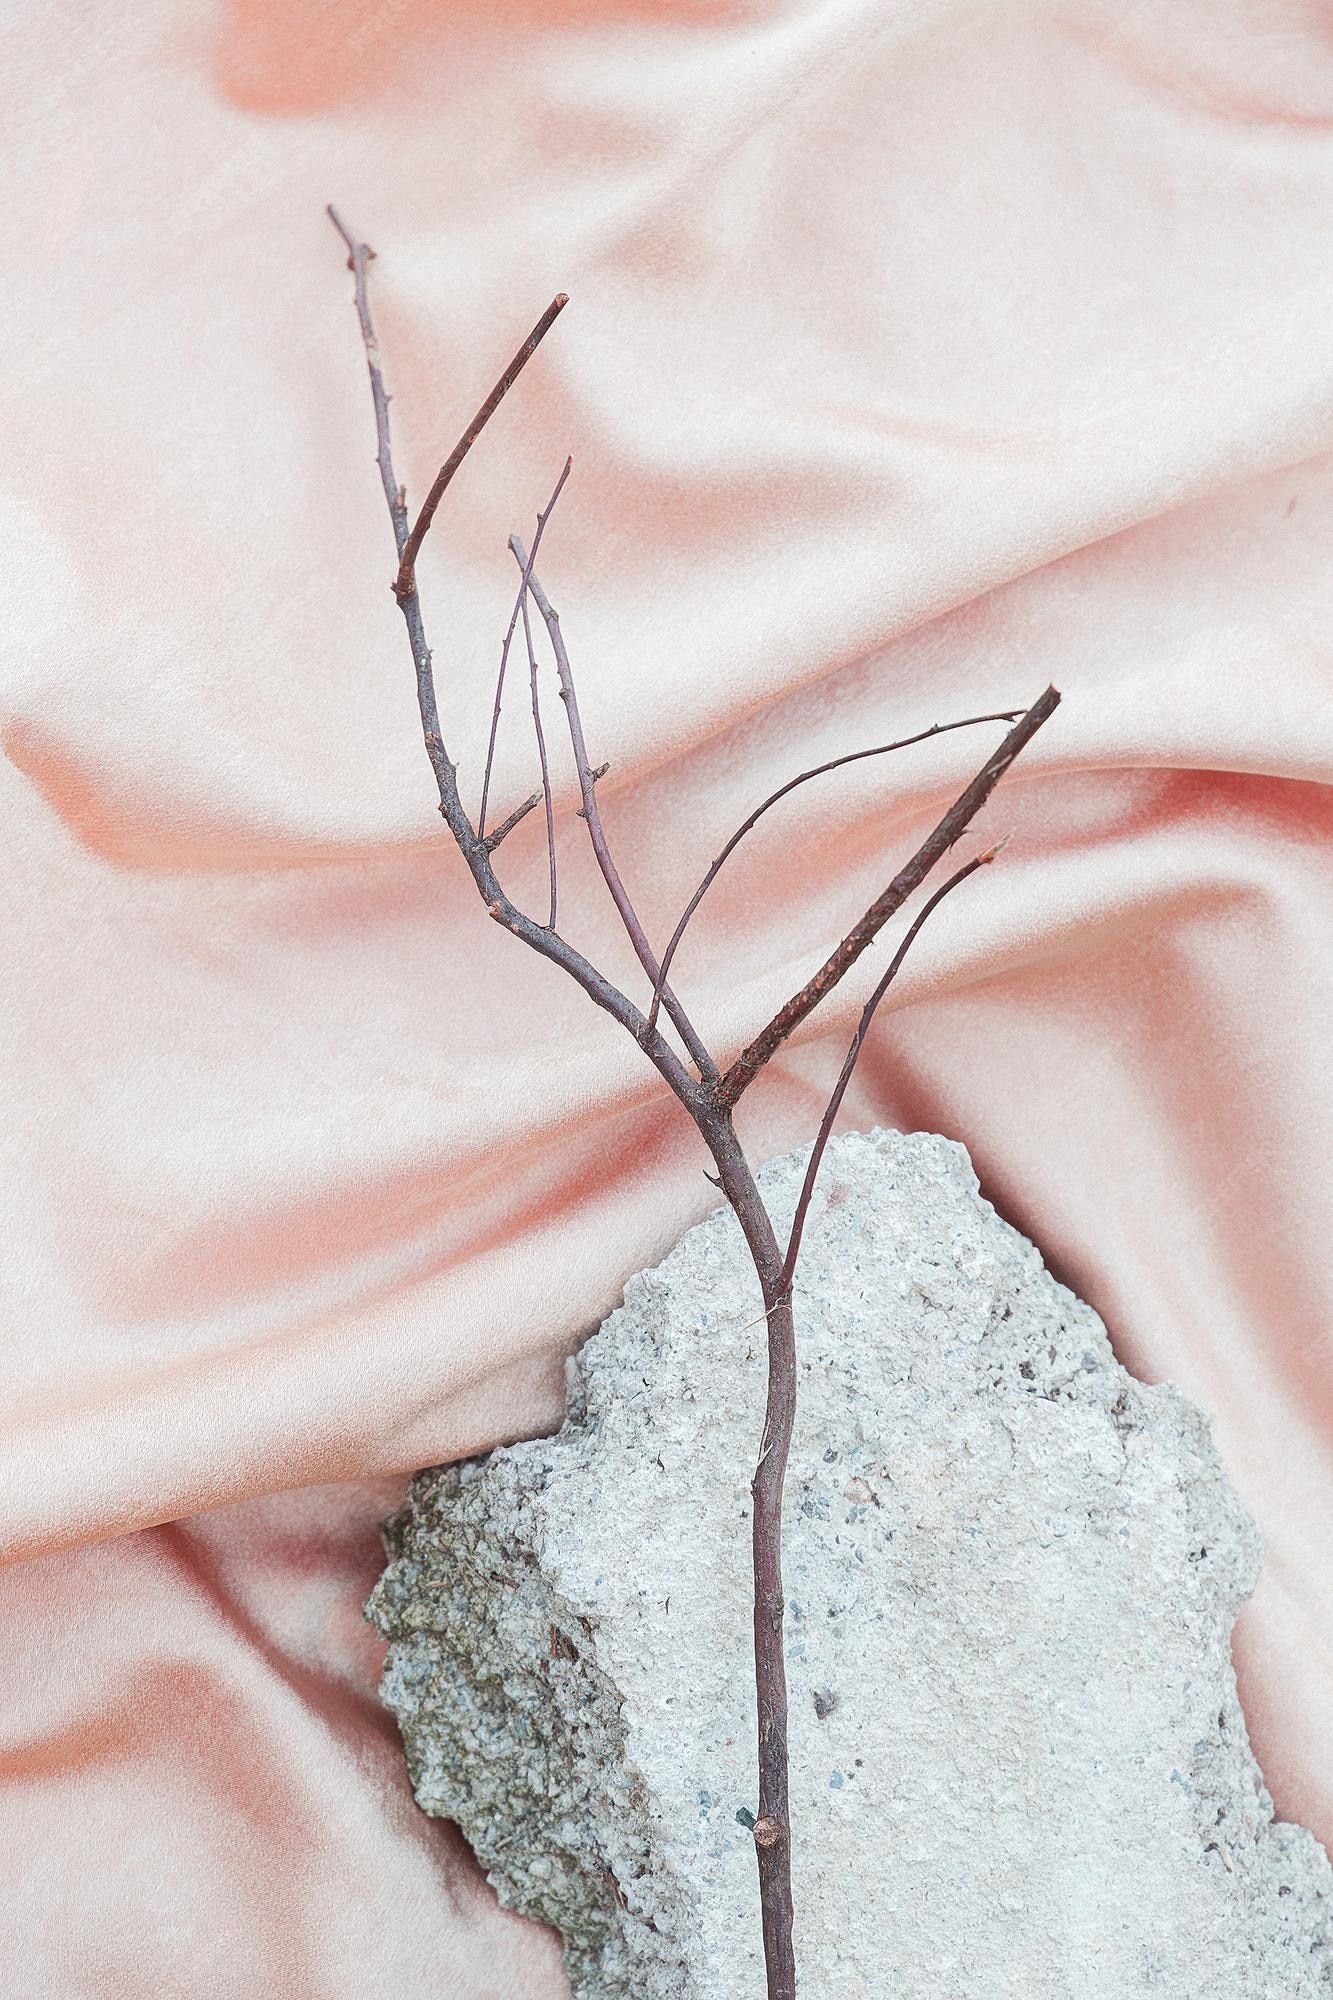 A branch of a plant in front of a pink cloth - Minimalist beige